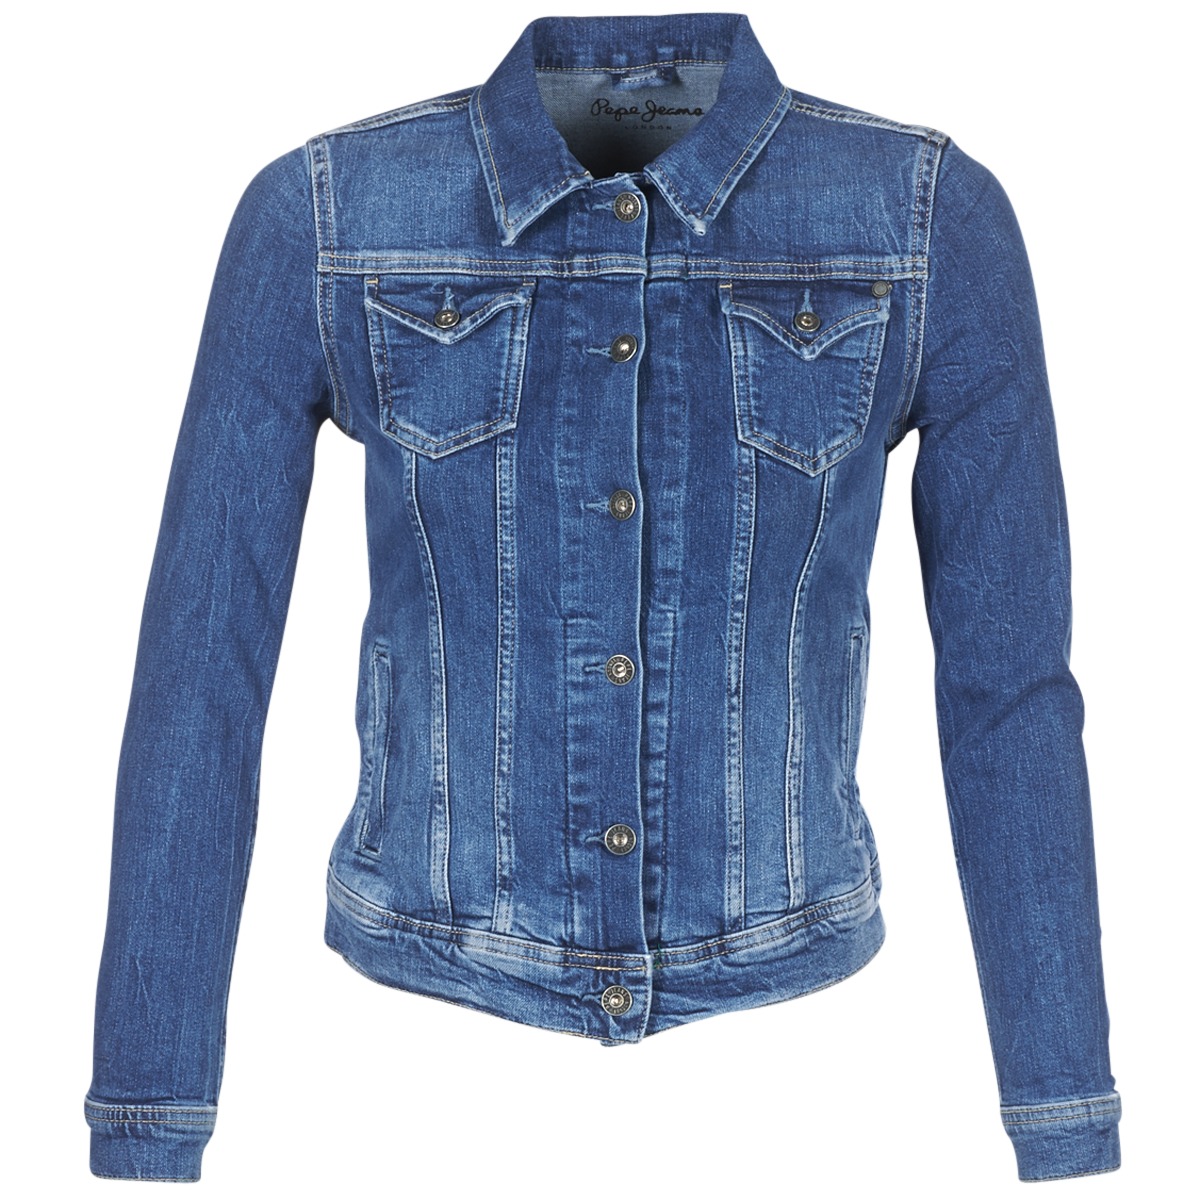 delivery Medium | Blue Spartoo ! Denim 87,20 Women - € / THRIFT Clothing jackets Fast Europe Pepe - jeans